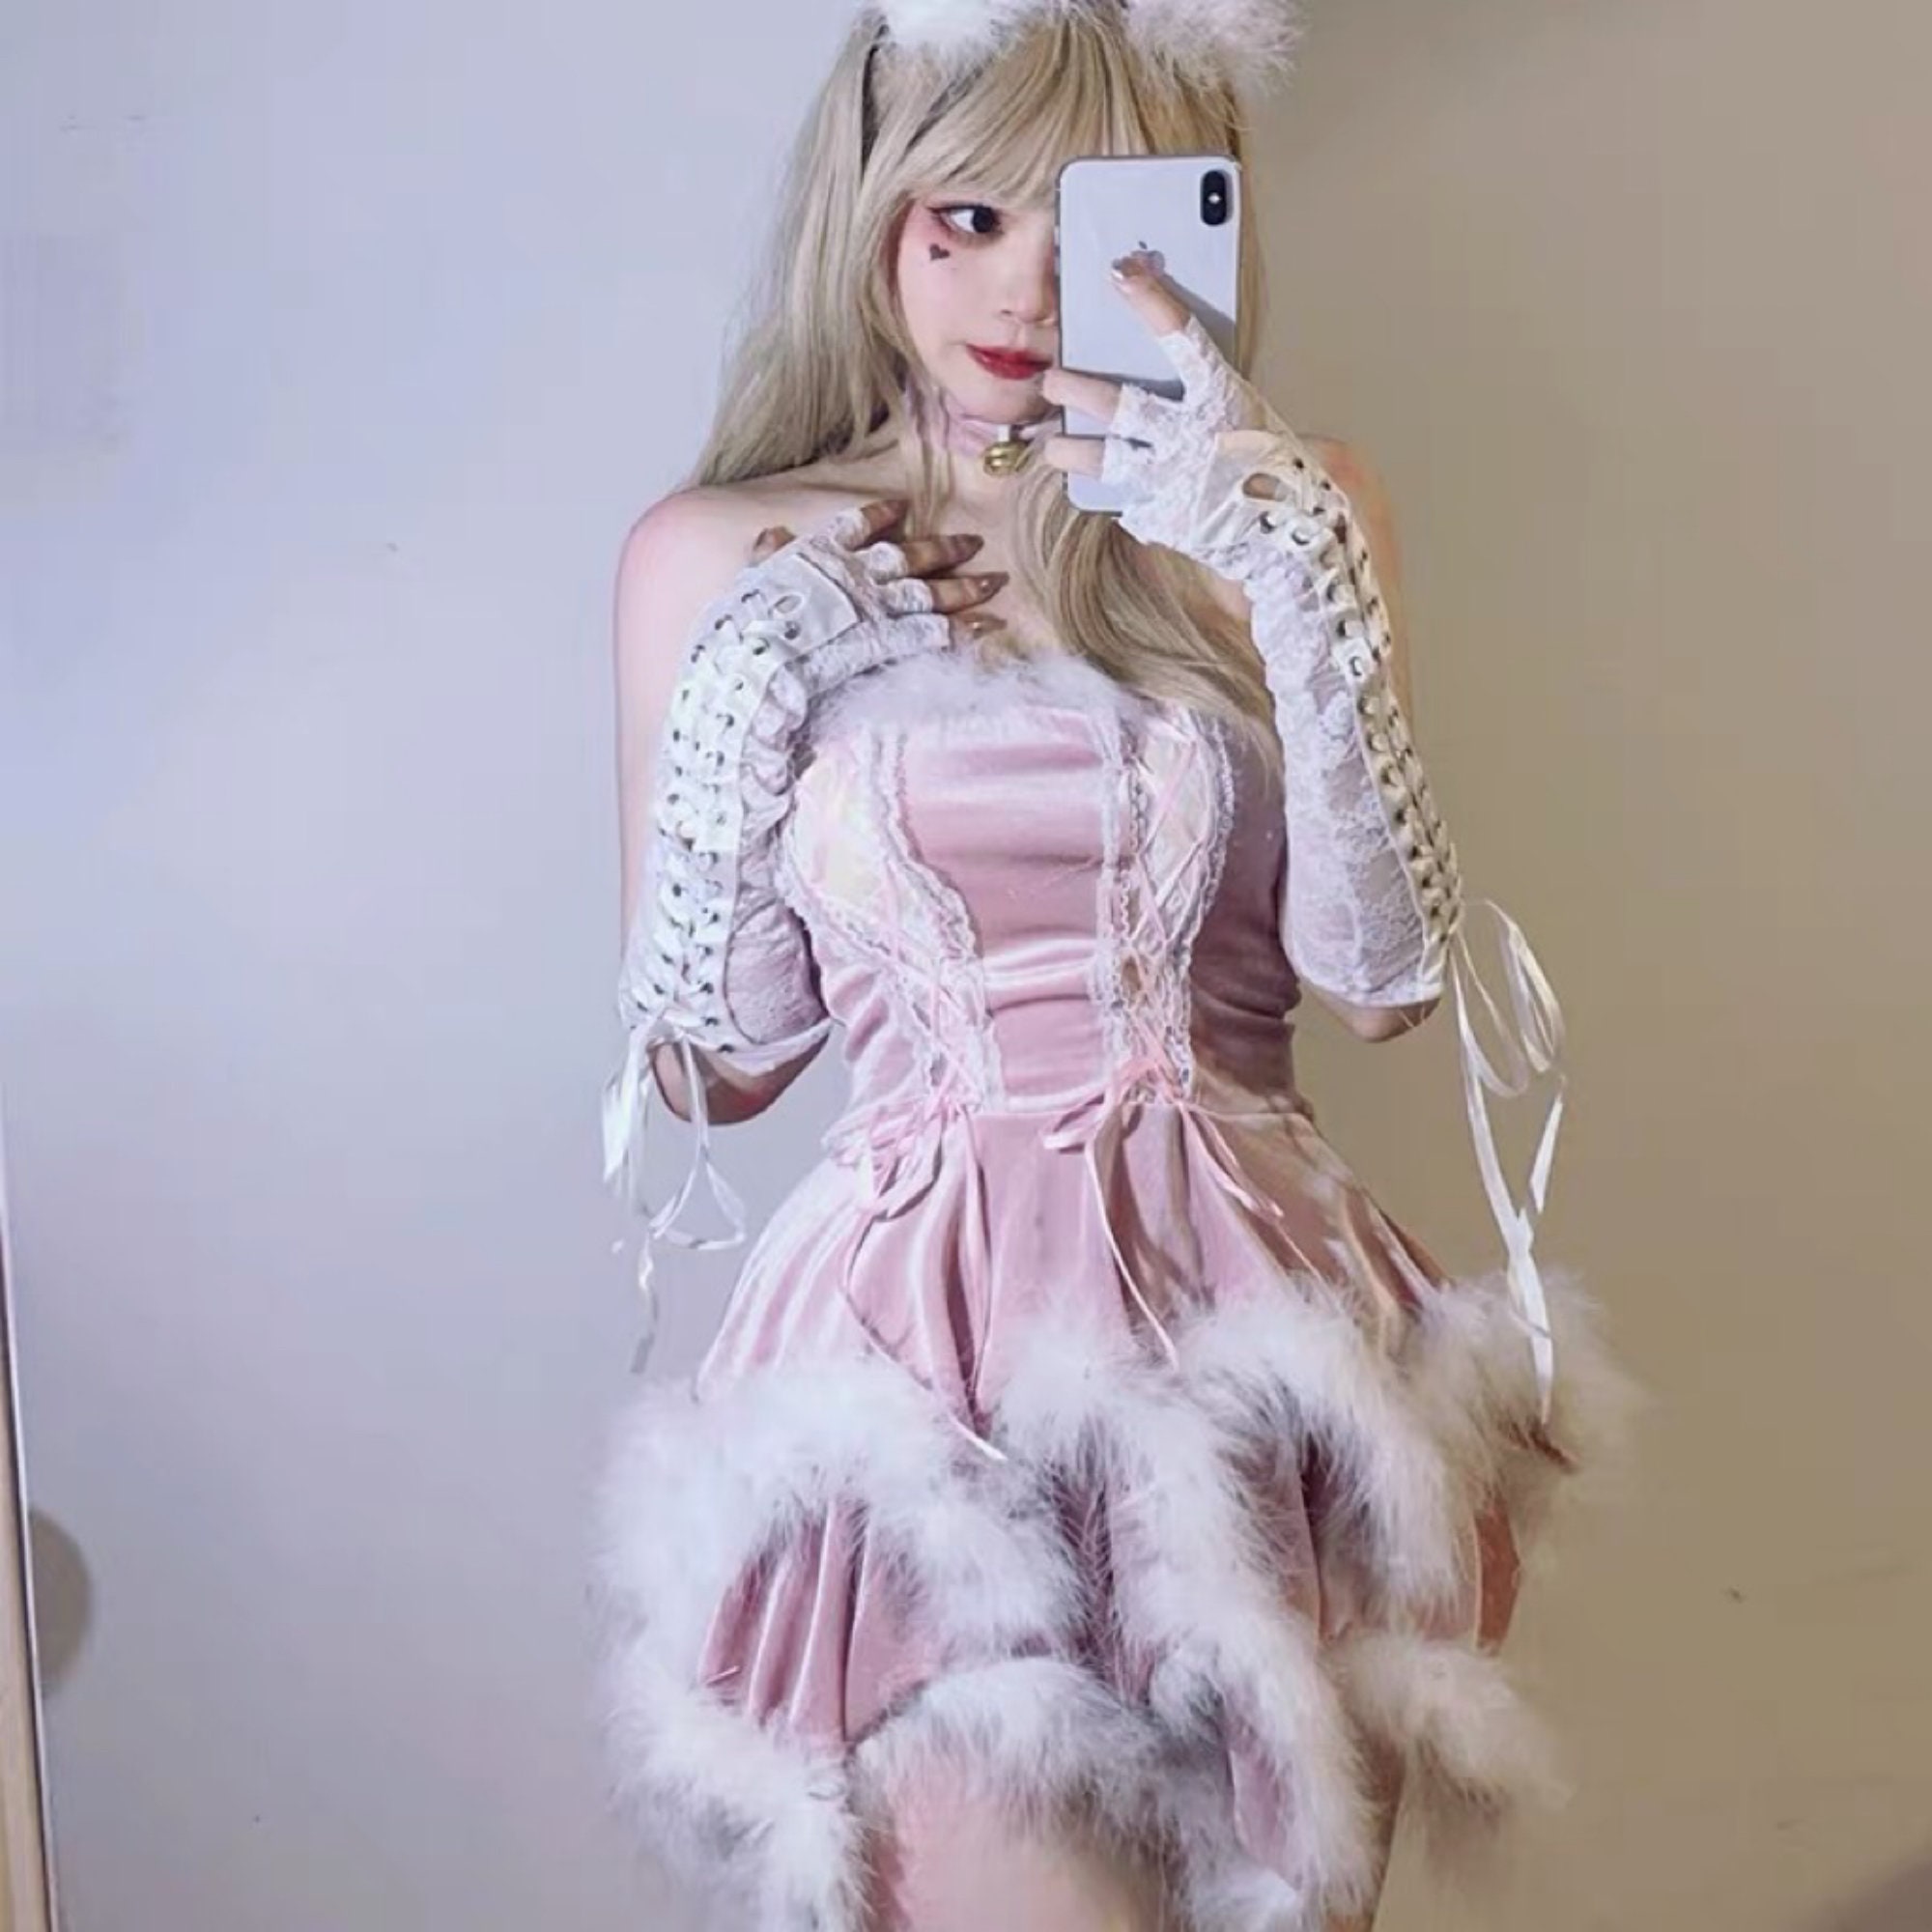 Japanese Anime Maid Cosplay Costume Plus Size Pink Dress Women Halloween  Party Stage Outfits Lolita Girl Beauty Bow Maids Outfit  Cosplay Costumes   AliExpress